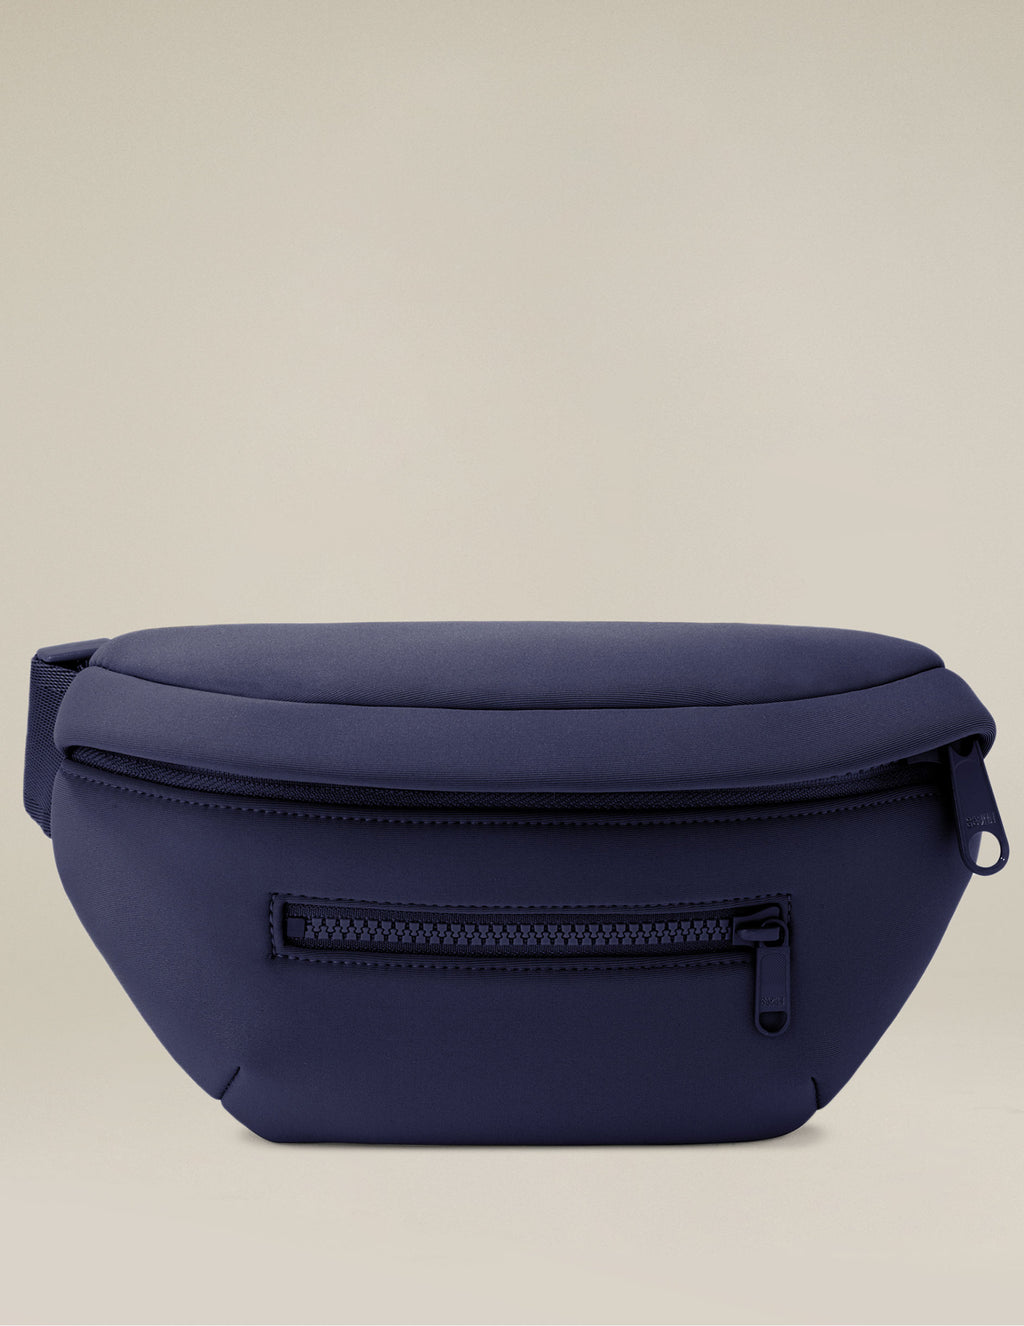 Dagne Dover Ace Fanny Pack Featured Image